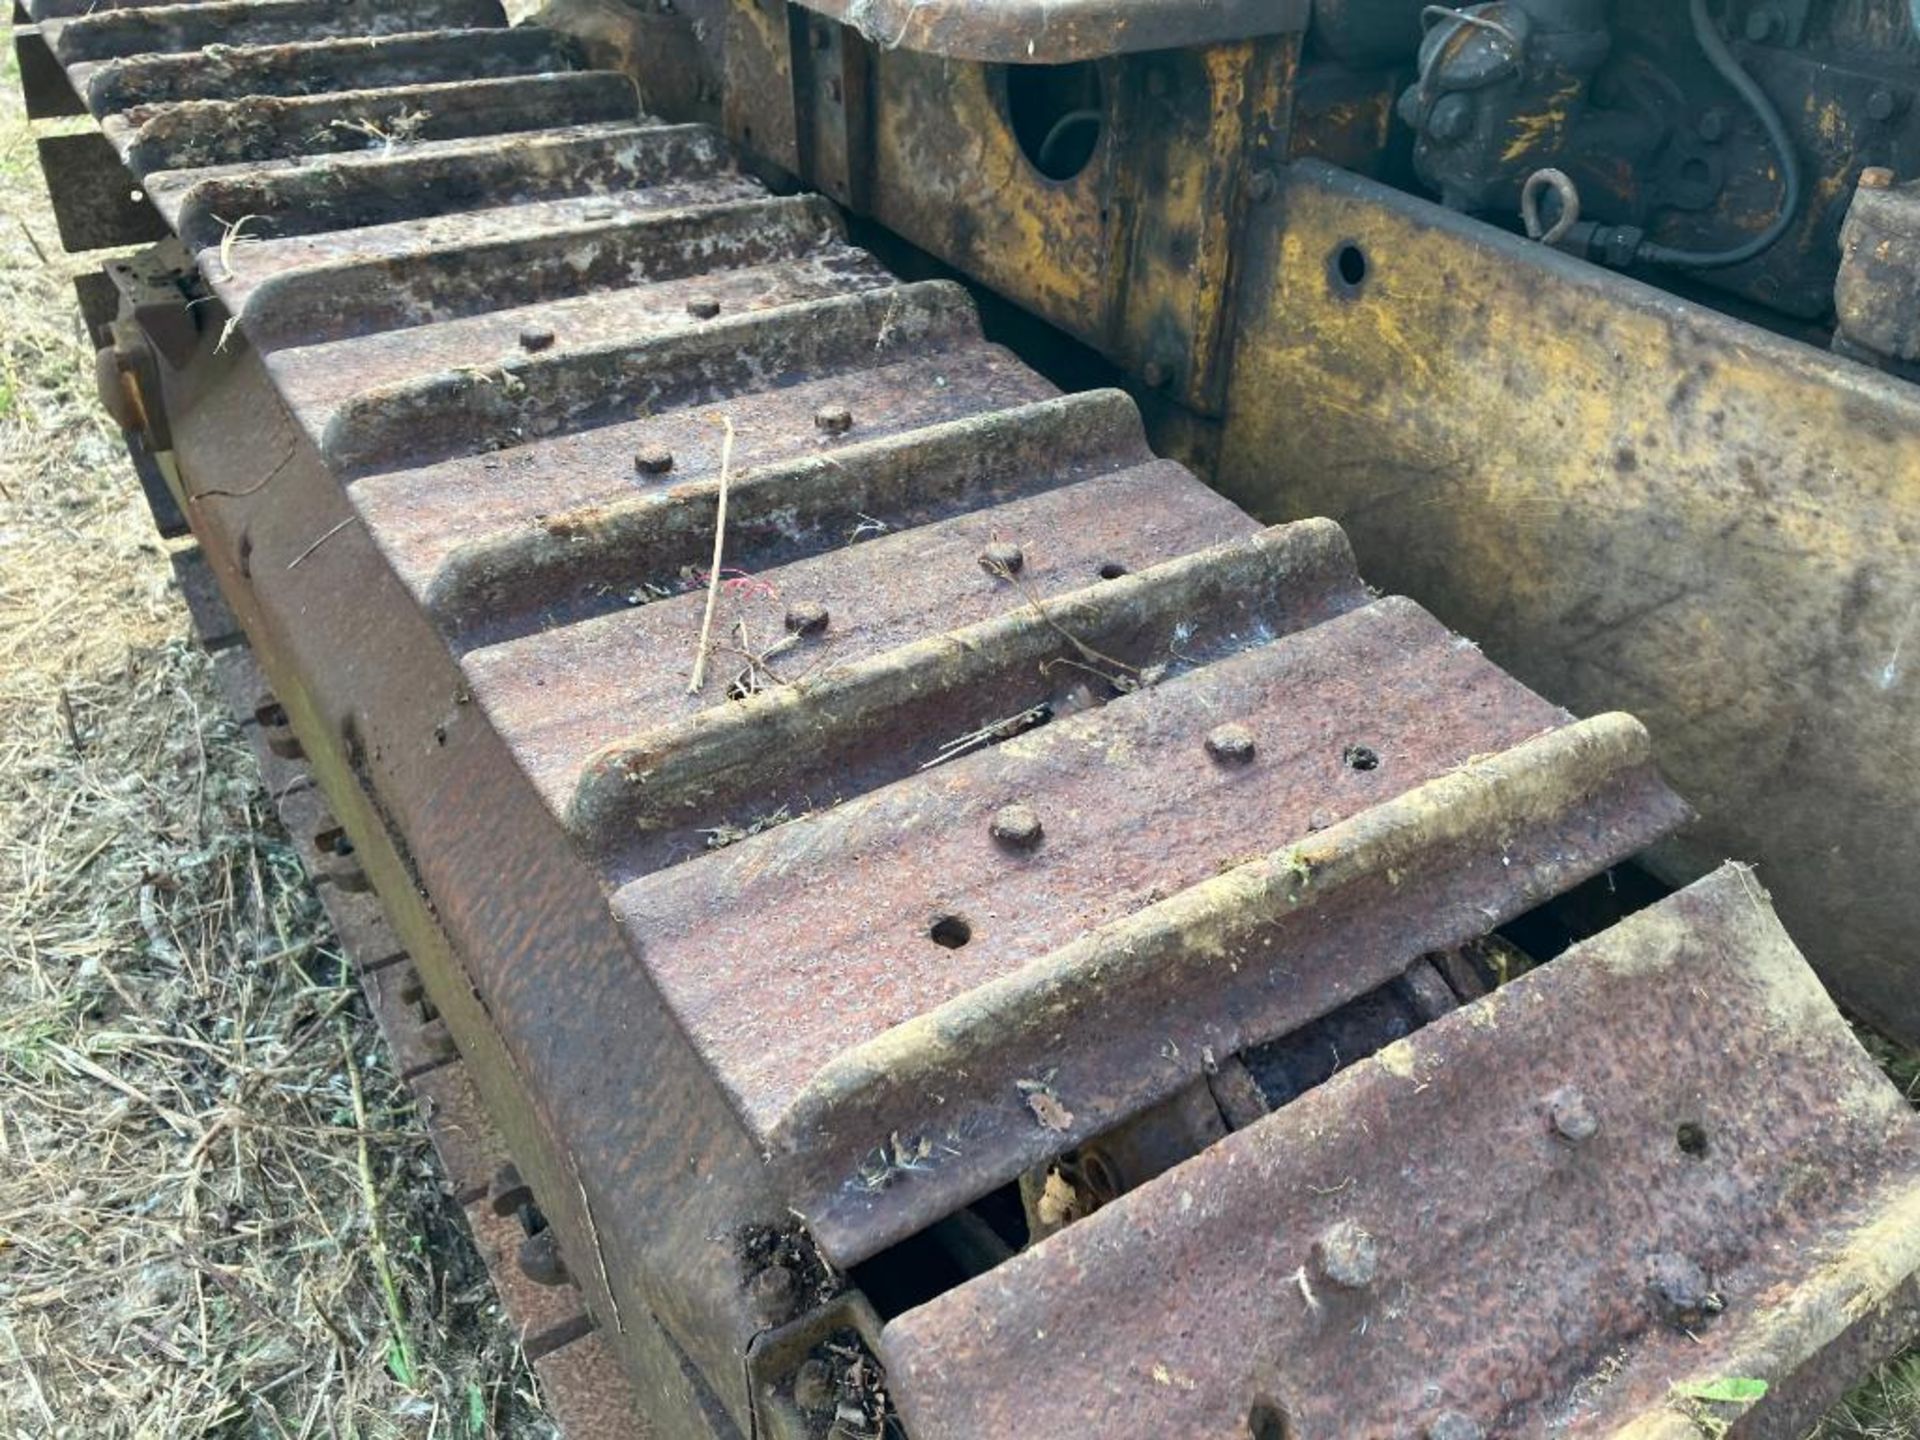 1939 Caterpillar R4 metal tracked crawler with 16" tracks and swinging drawbar. Serial No: 6G1021WS - Image 4 of 14